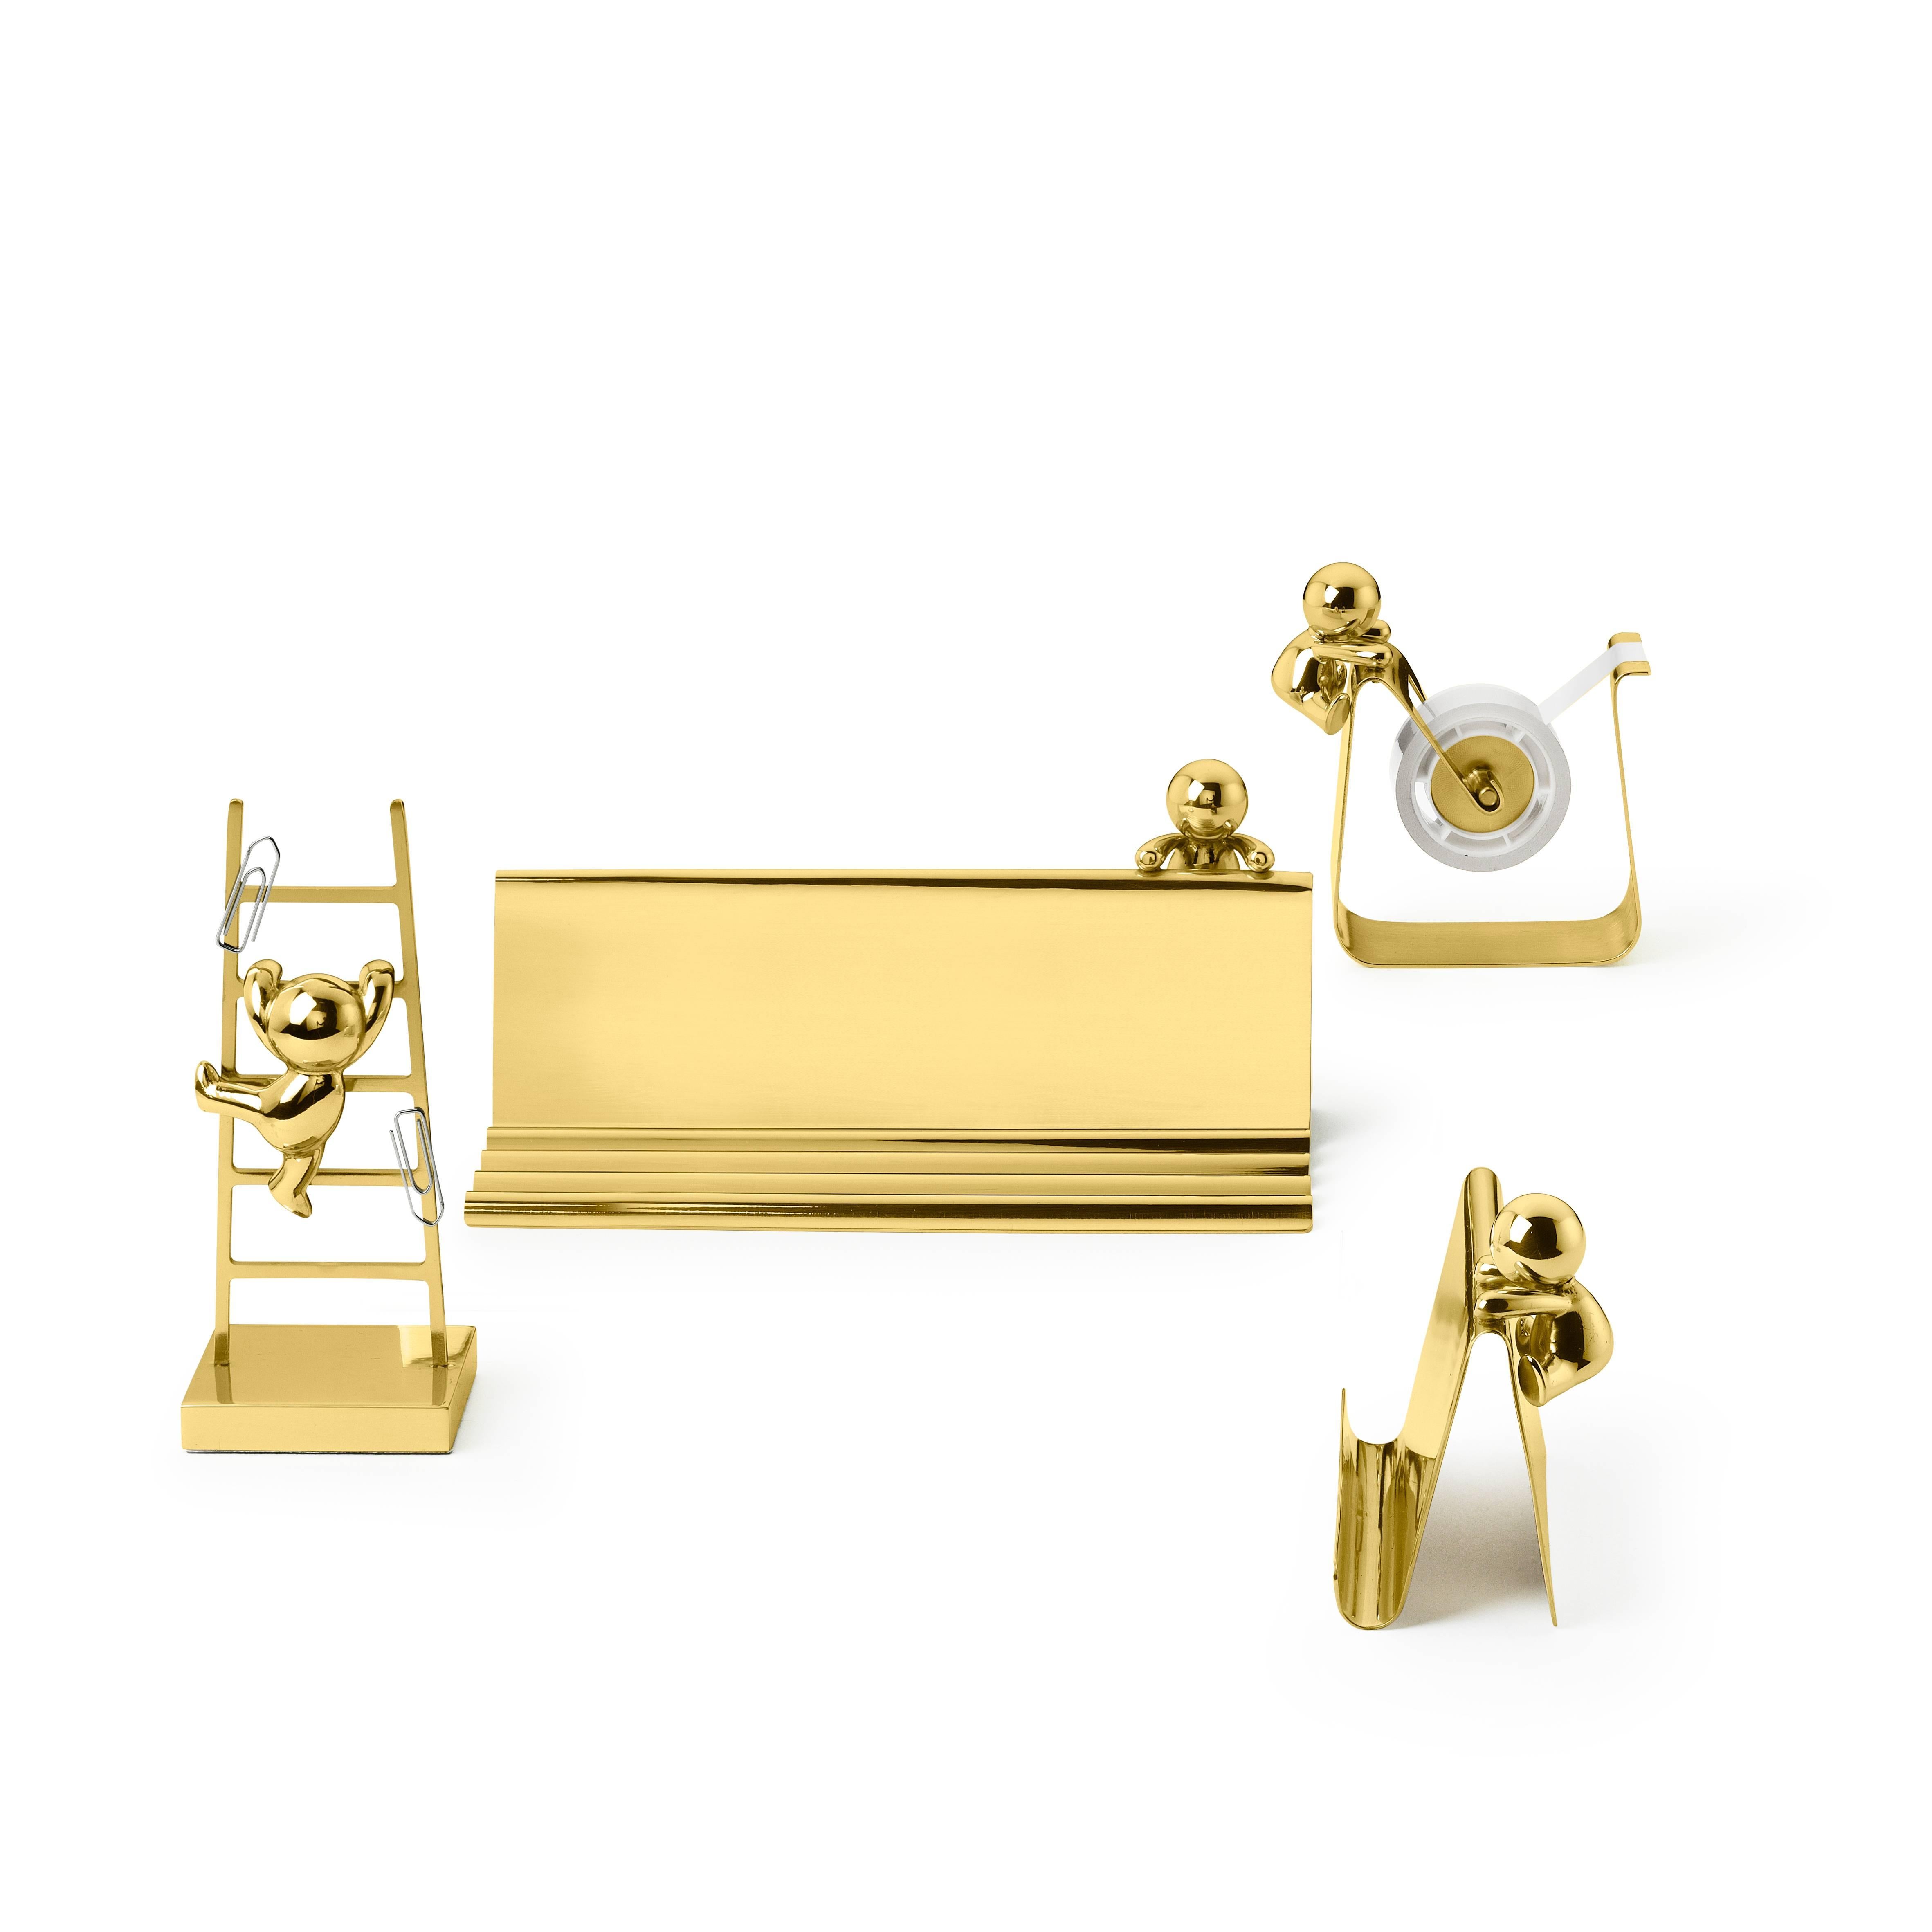 Made from brass the pen and card tray is suitable for storing pens, pencils and cards and adds a touch of whimsy to your home office.